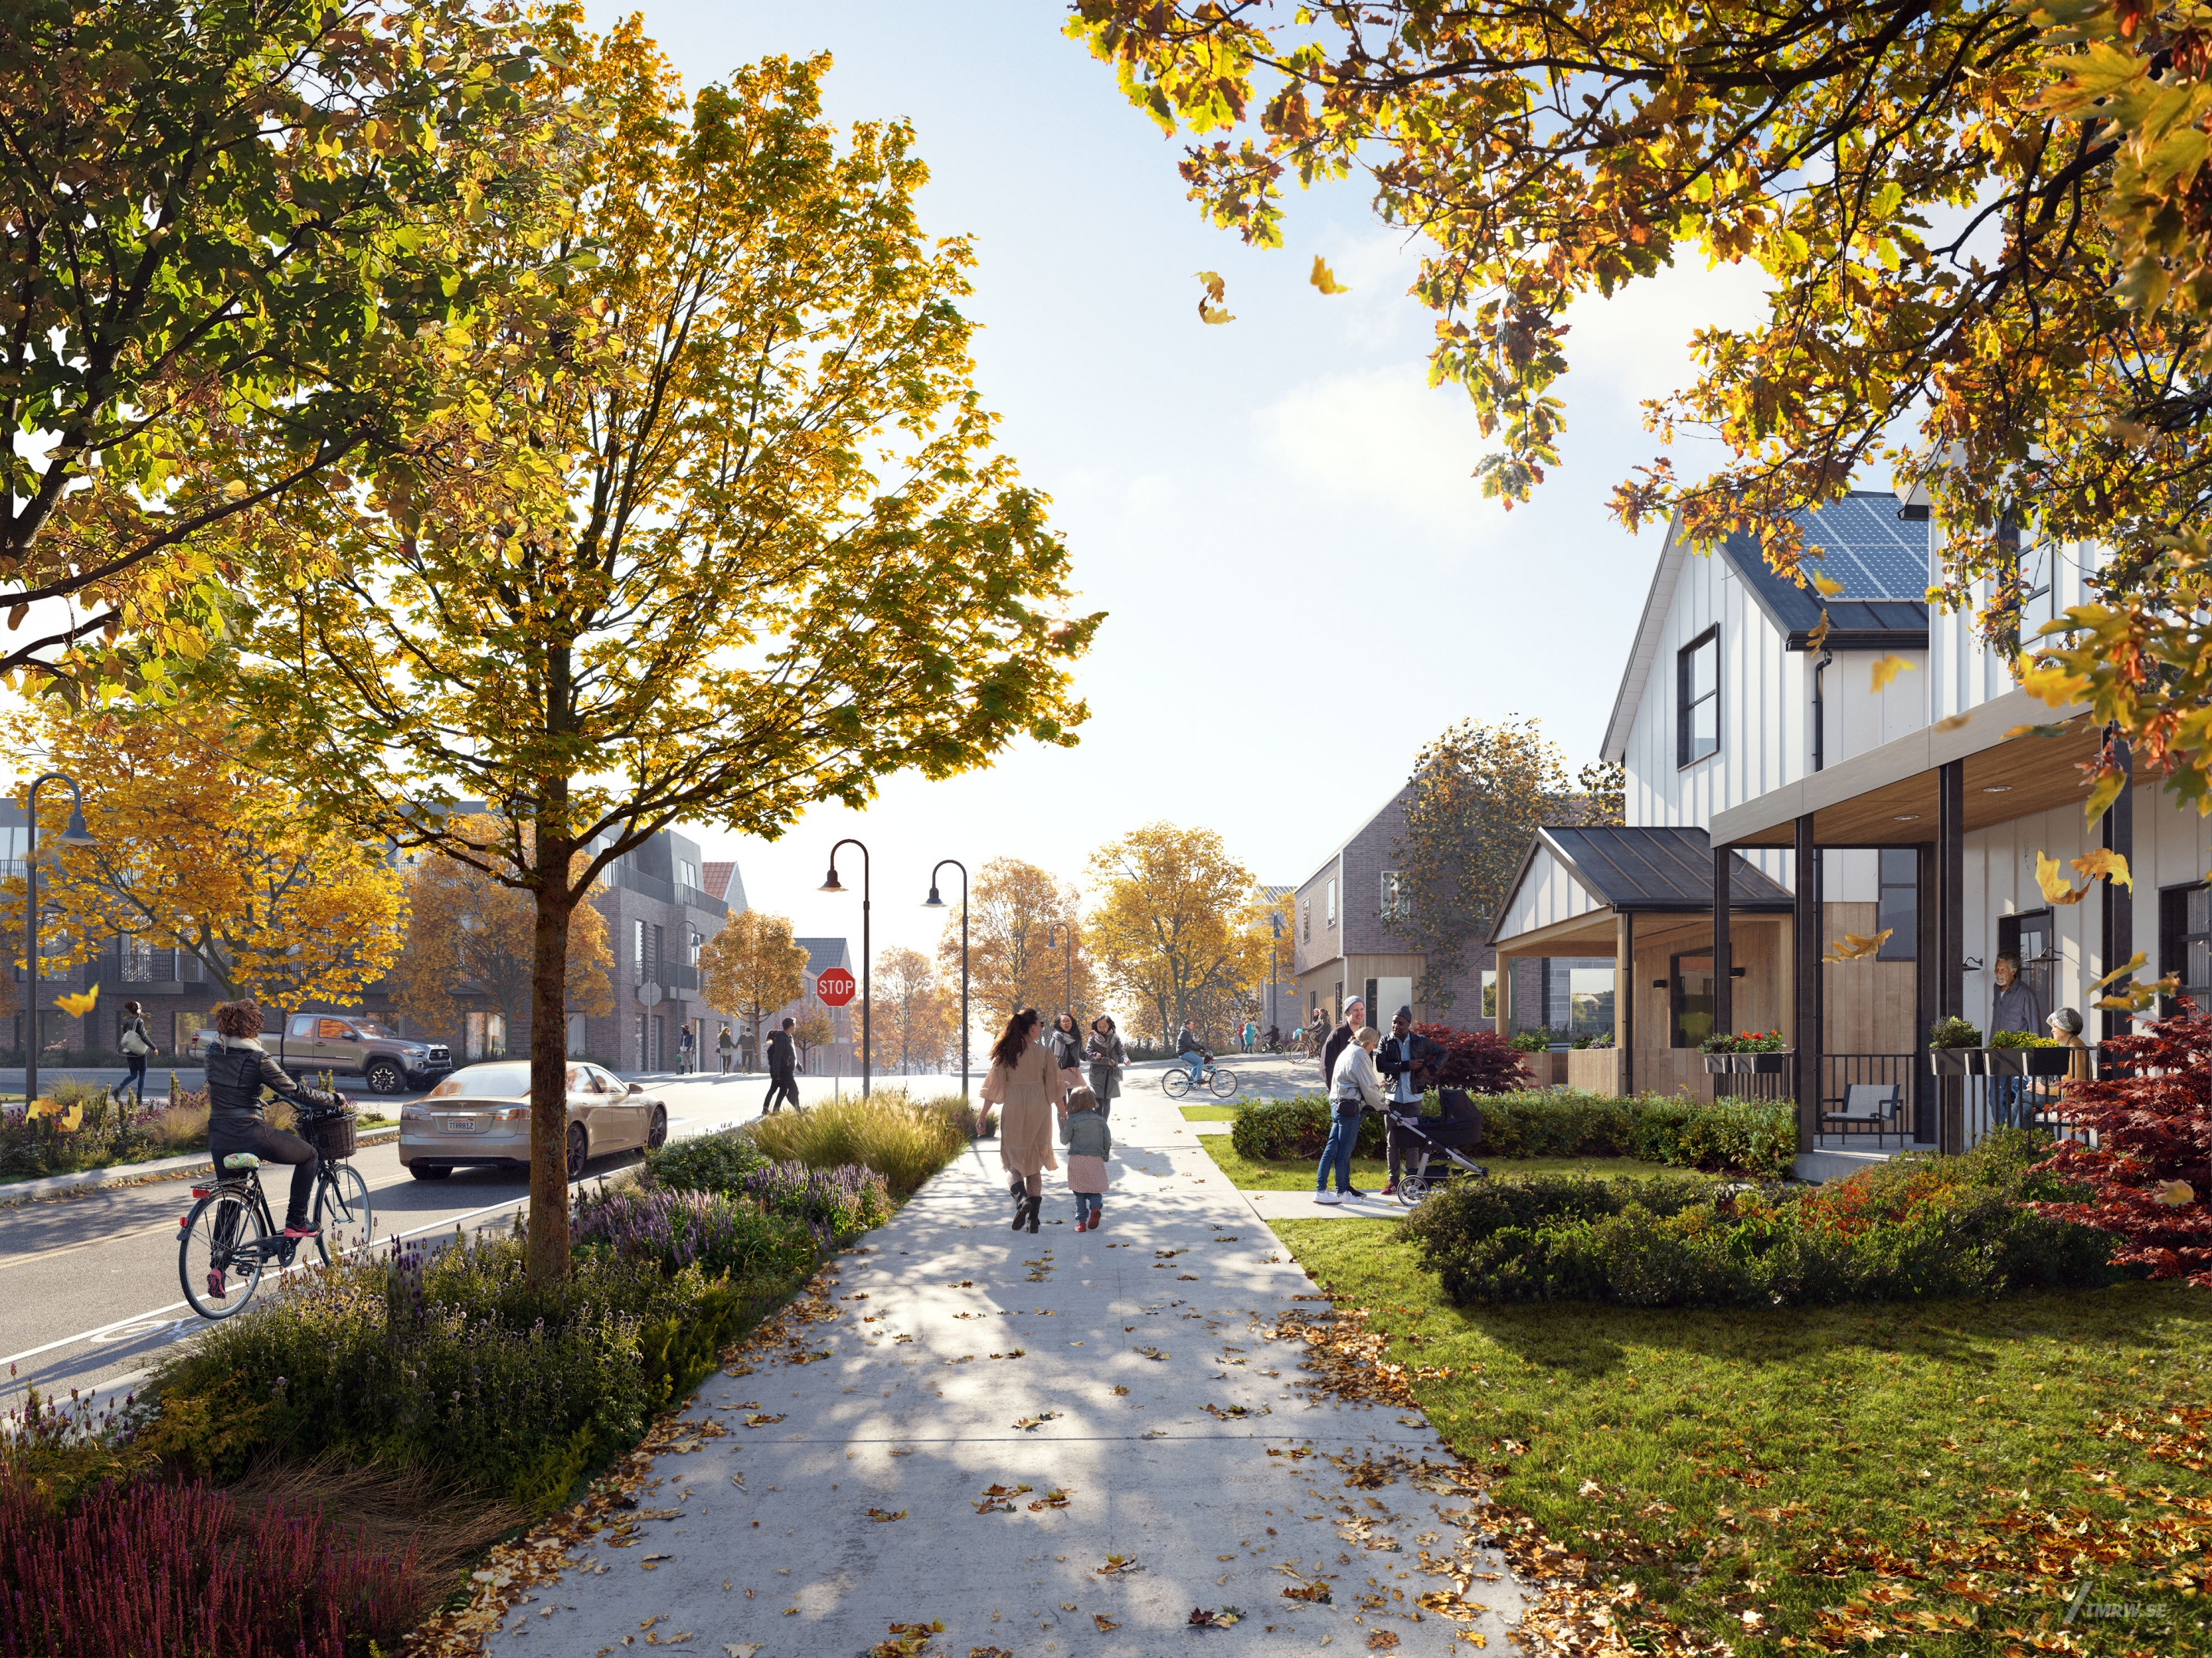 Architectural visualization of Bloomington for SOM. An image of the exterior of a residential building with pedestrians on the side walk infront in daylight from street view.